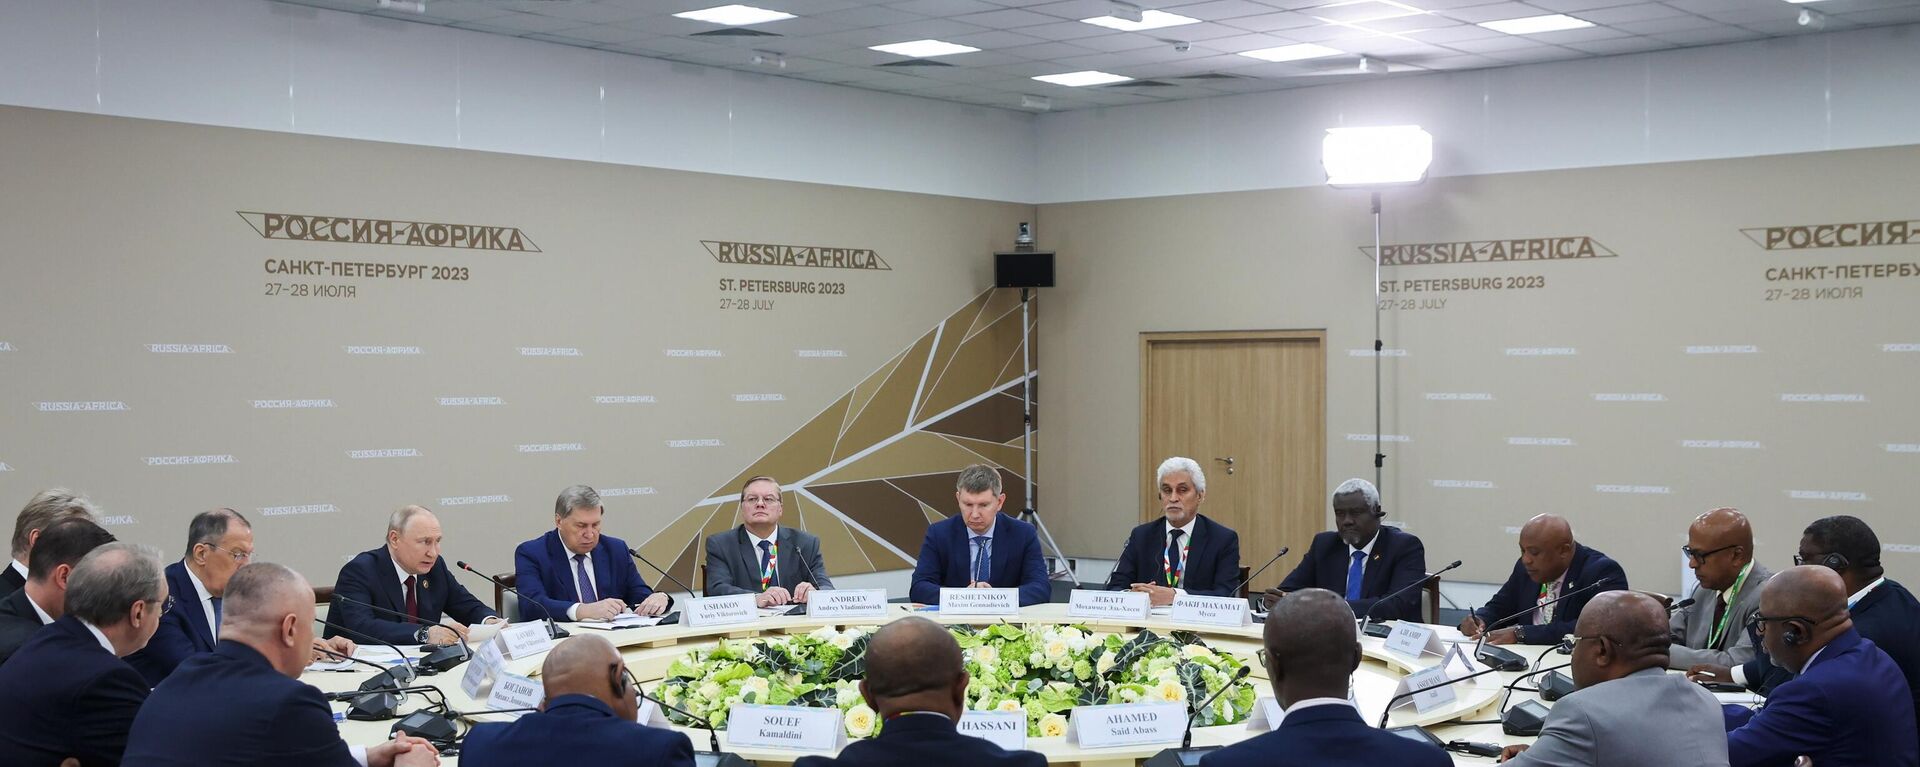 Russian President Vladimir Putin during a meeting with Chairman of the African Union, President of the Union of Comoros Azali Assoumani and Chairman of the Commission of the African Union Moussa Faki Mahamat on the sidelines of the second Summit and Forum Russia - Africa in St. Petersburg - Sputnik Africa, 1920, 29.07.2023